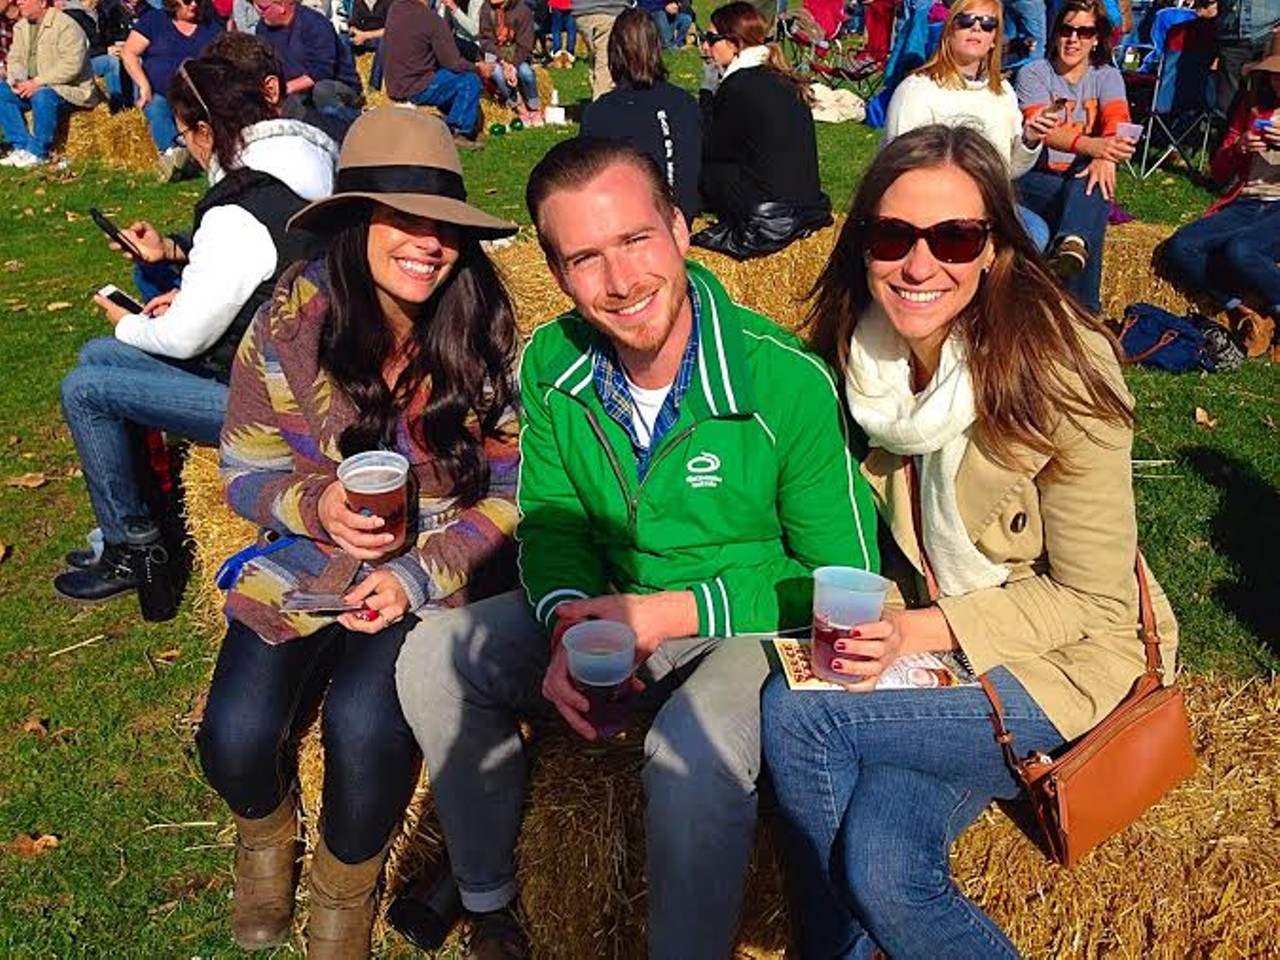 12 Photos from the Scene Events Team at Cleveland Beer Week's Bluegrass Brew Bash